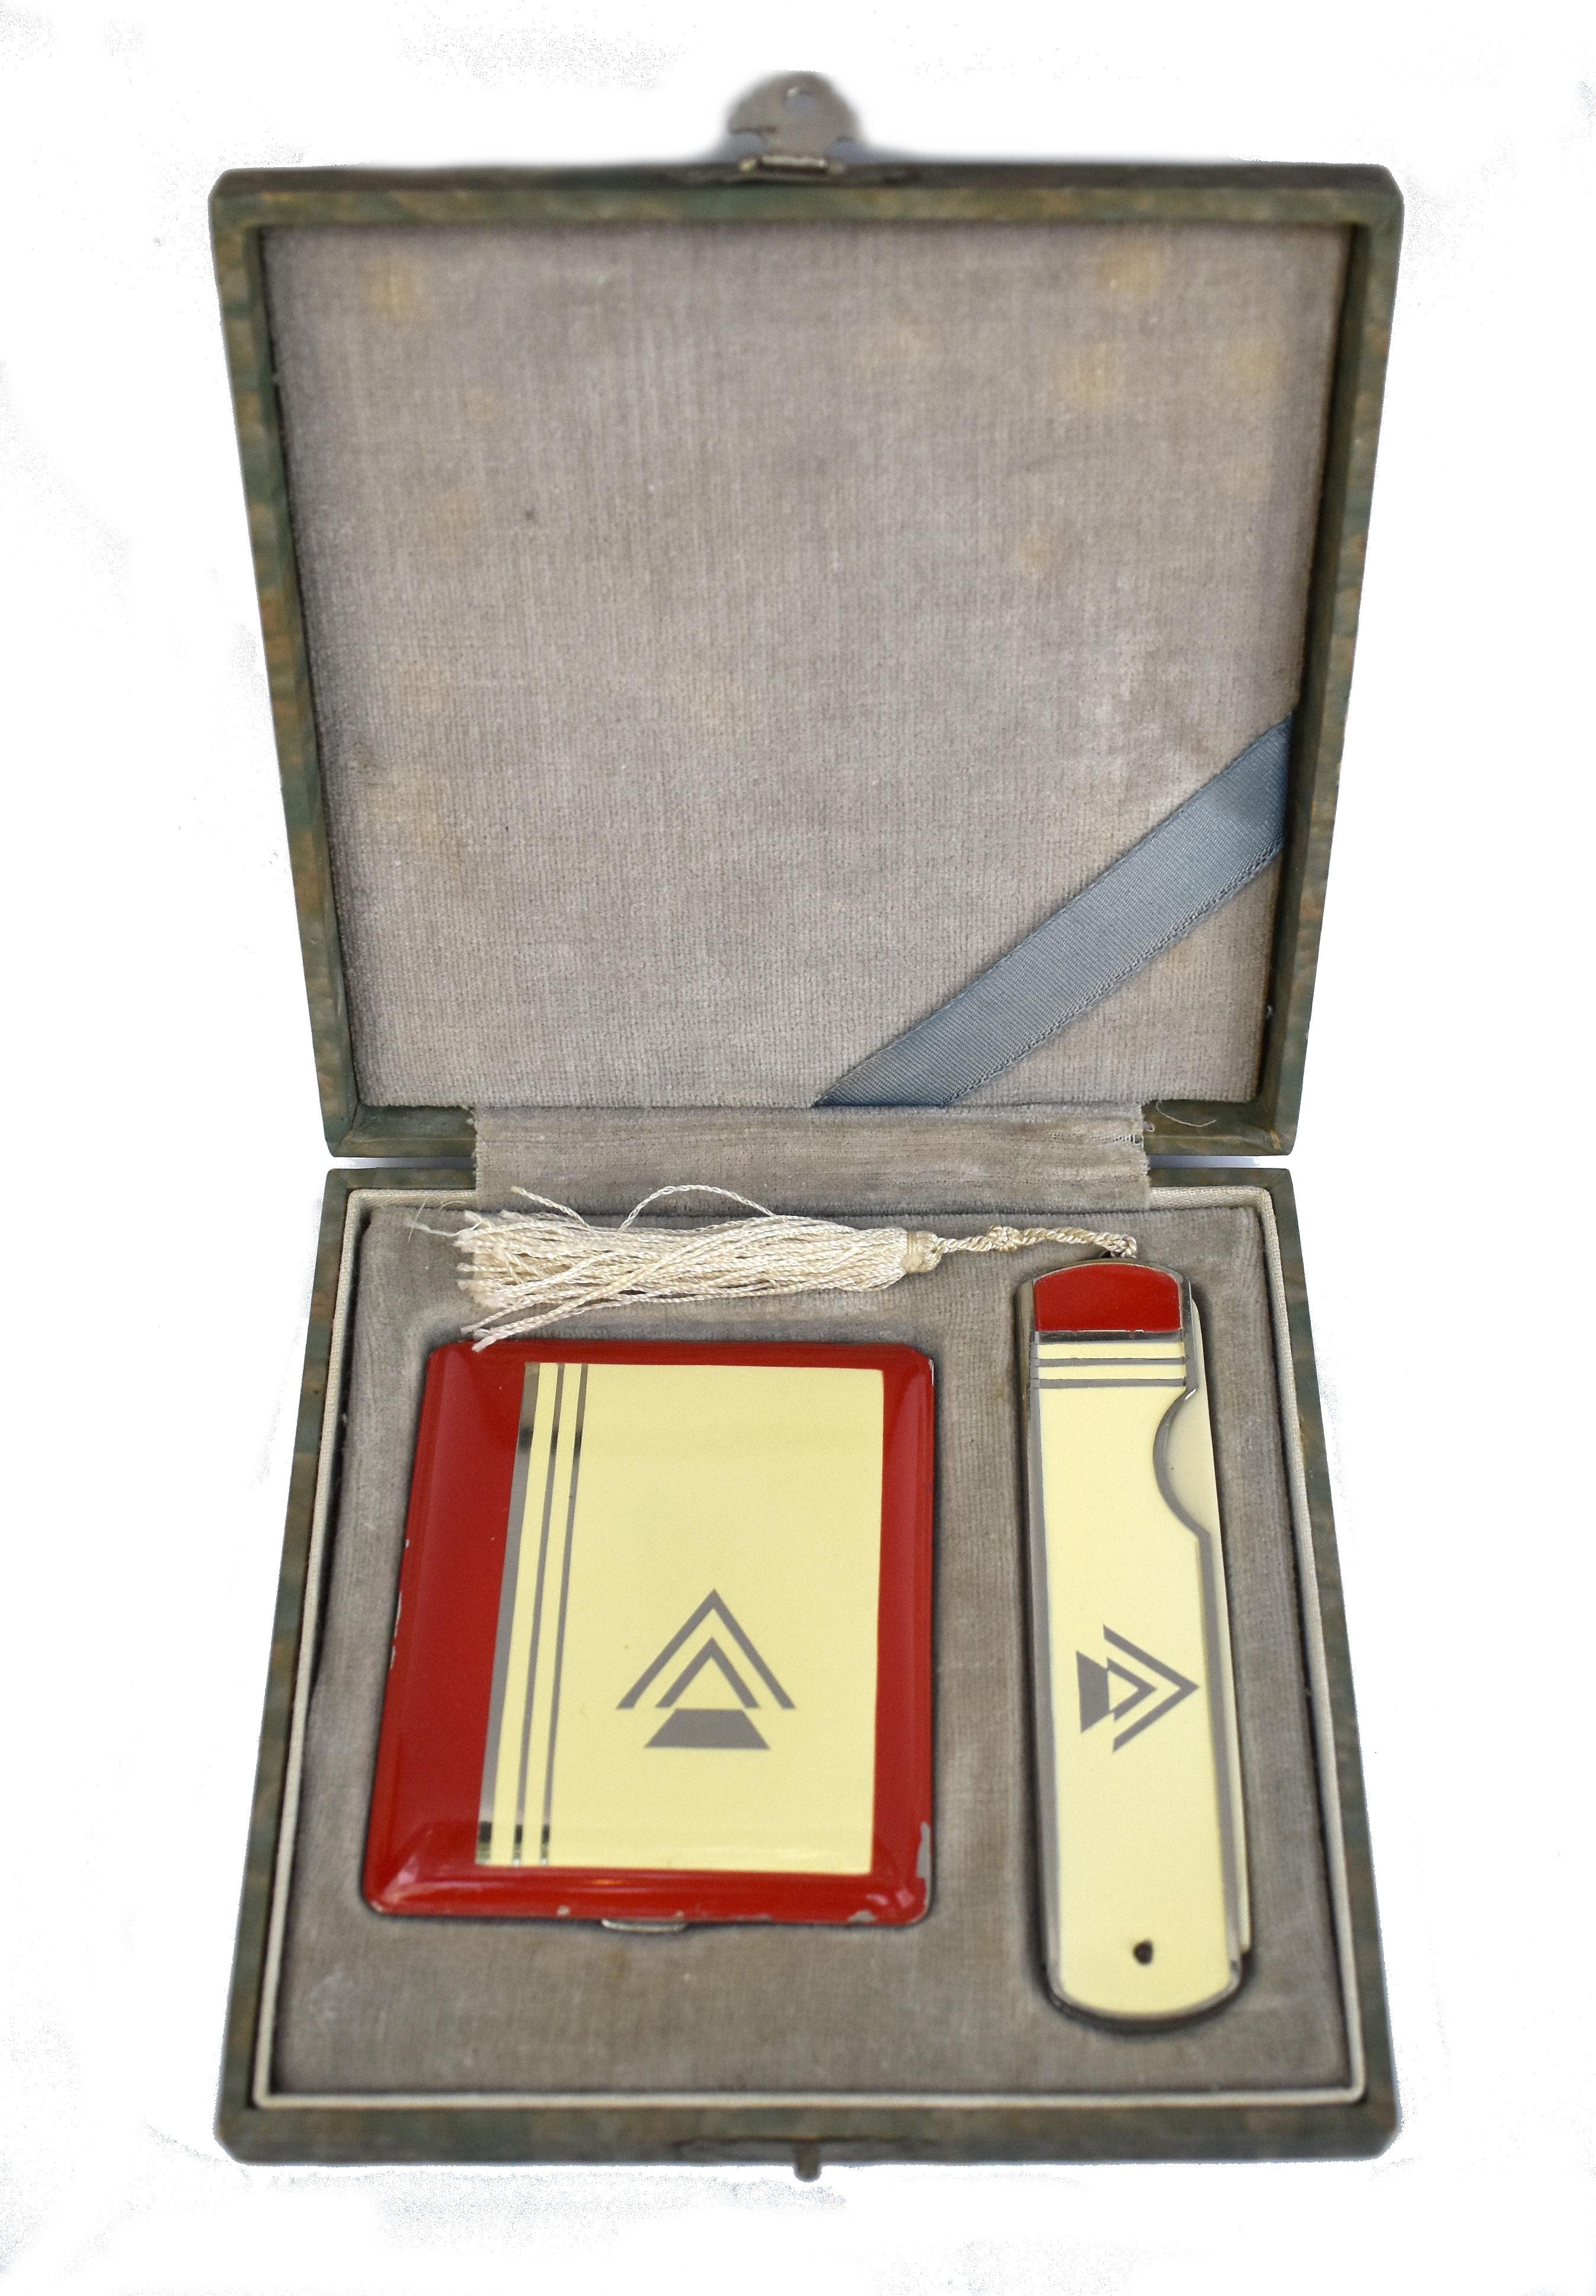 For your consideration is this rare boxed set of an Art Deco powder compact and comb in striking cream and red enamel decoration. The mirror and compact, including the powder puff, are in very good condition and the comb looks unused. Compact clicks